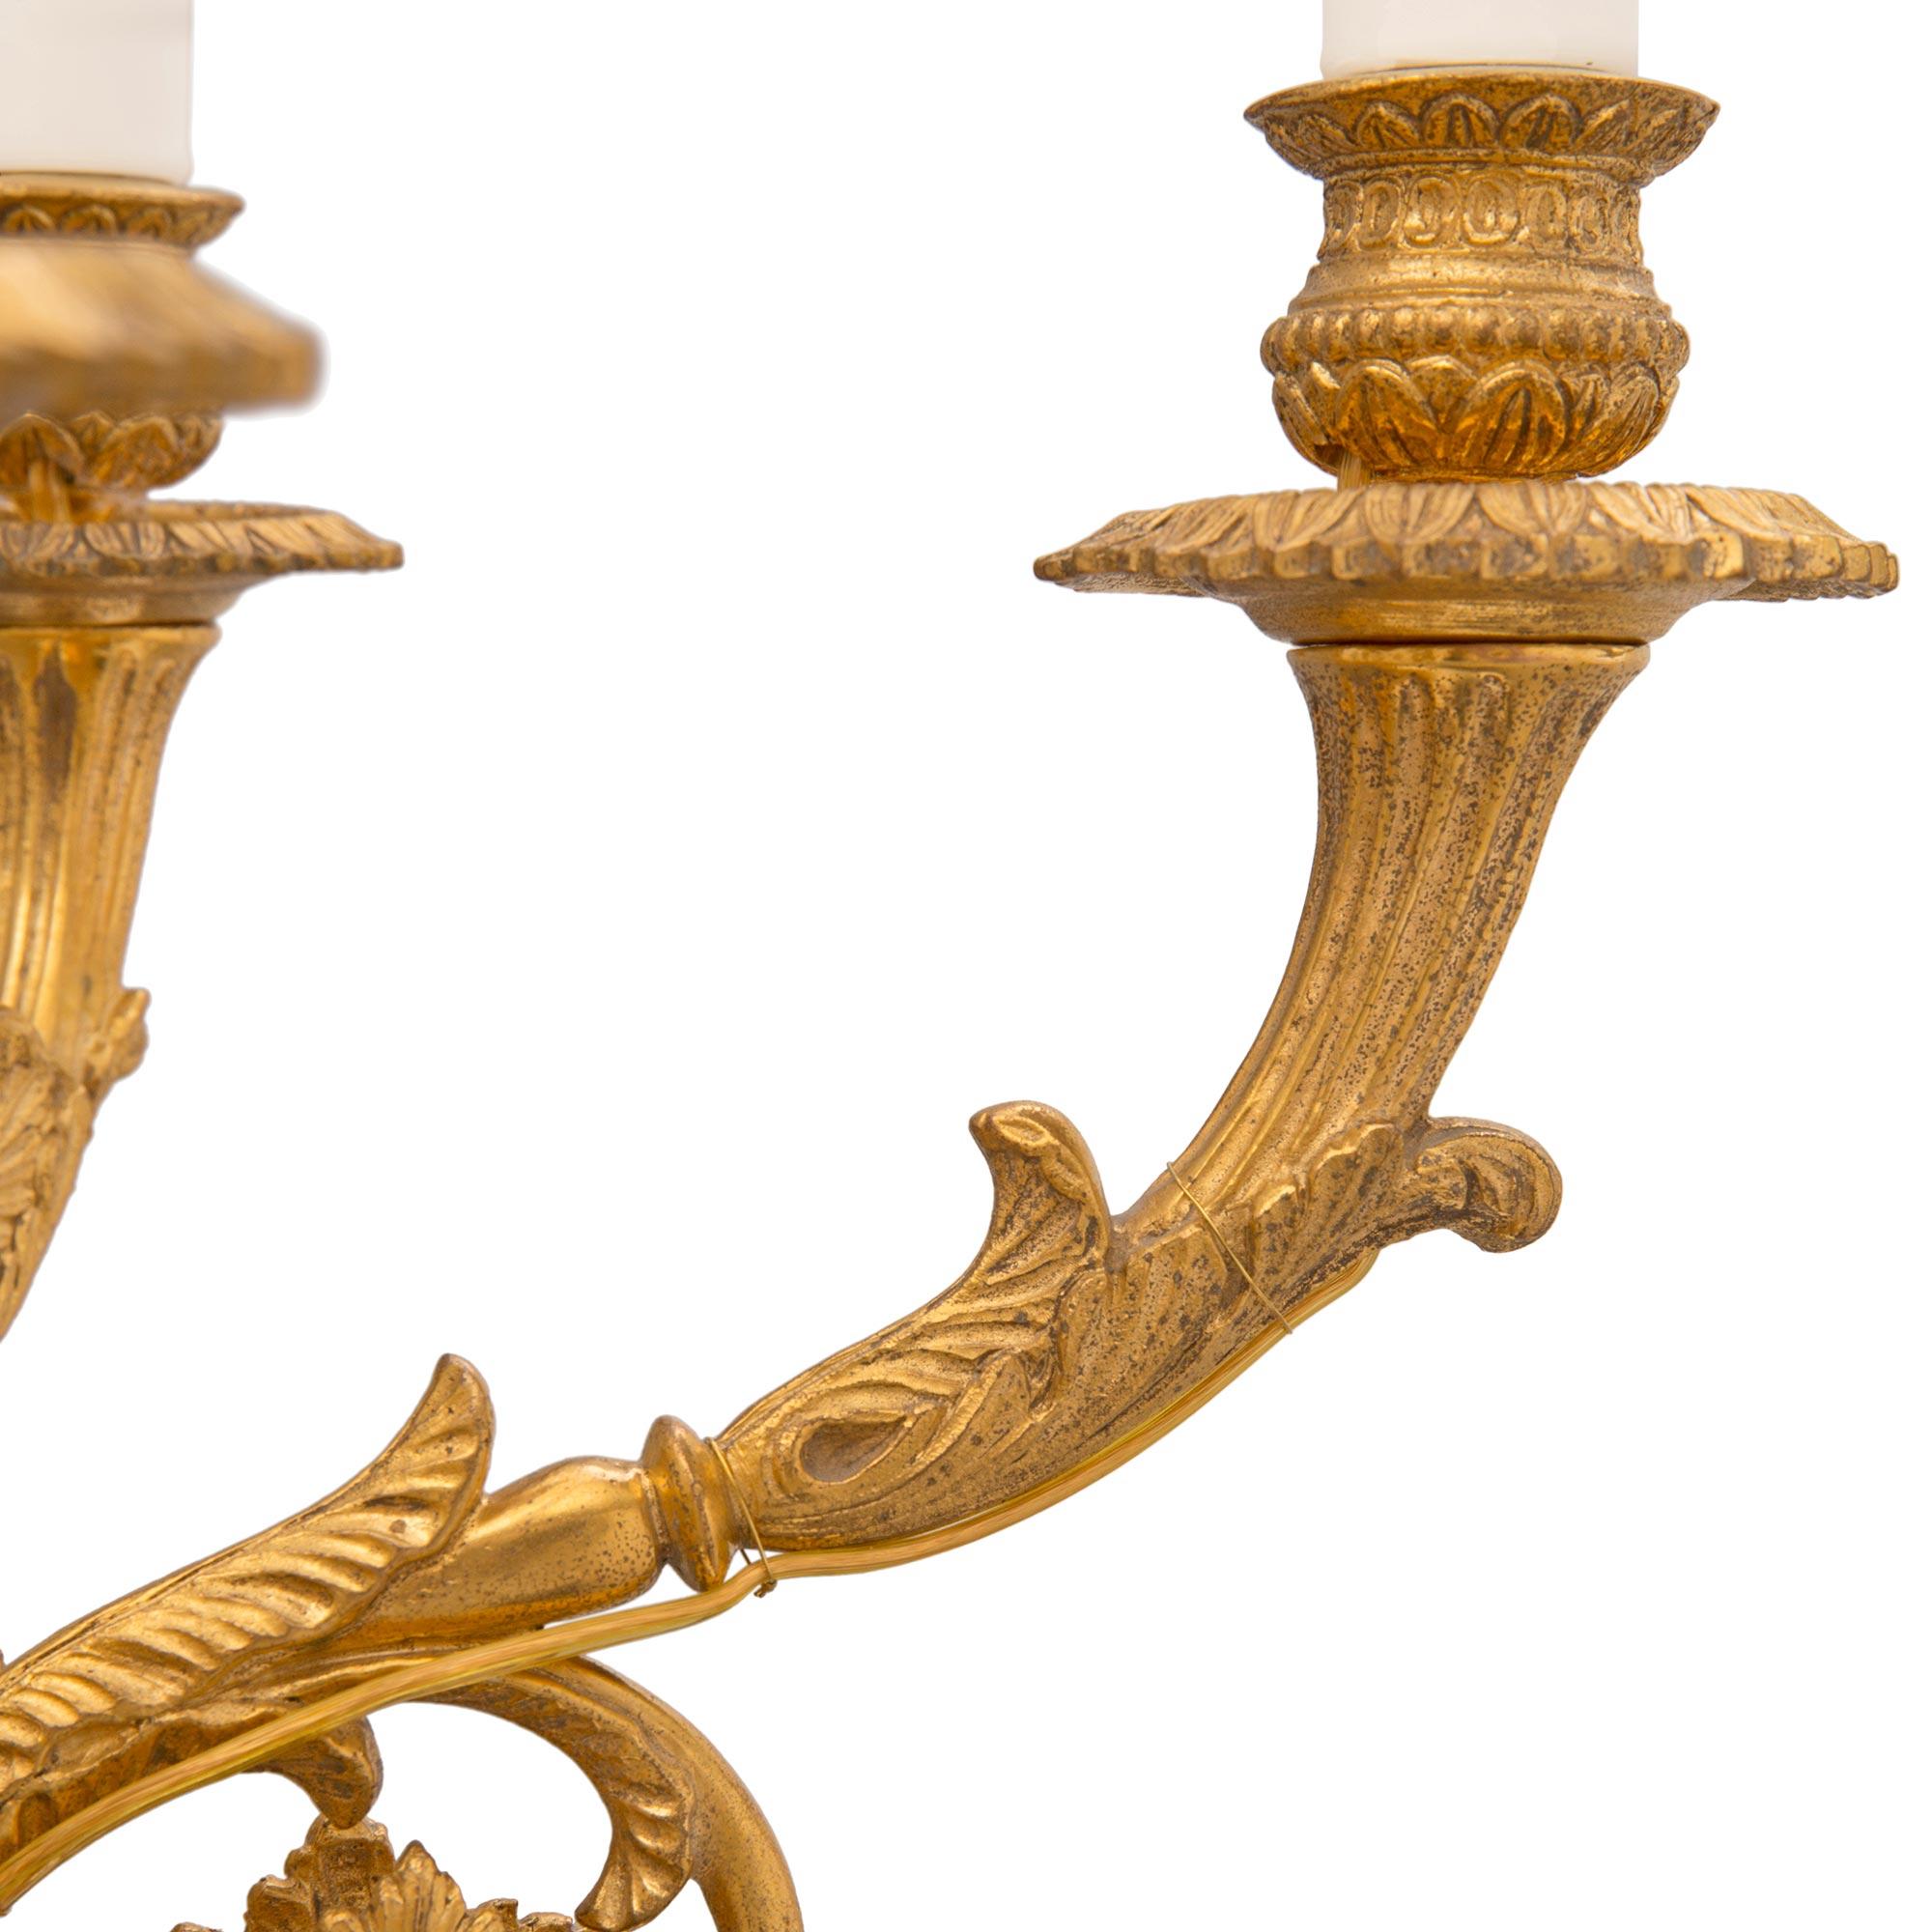 Pair of French Mid-19th Century Empire Style Ormolu Candelabras For Sale 3